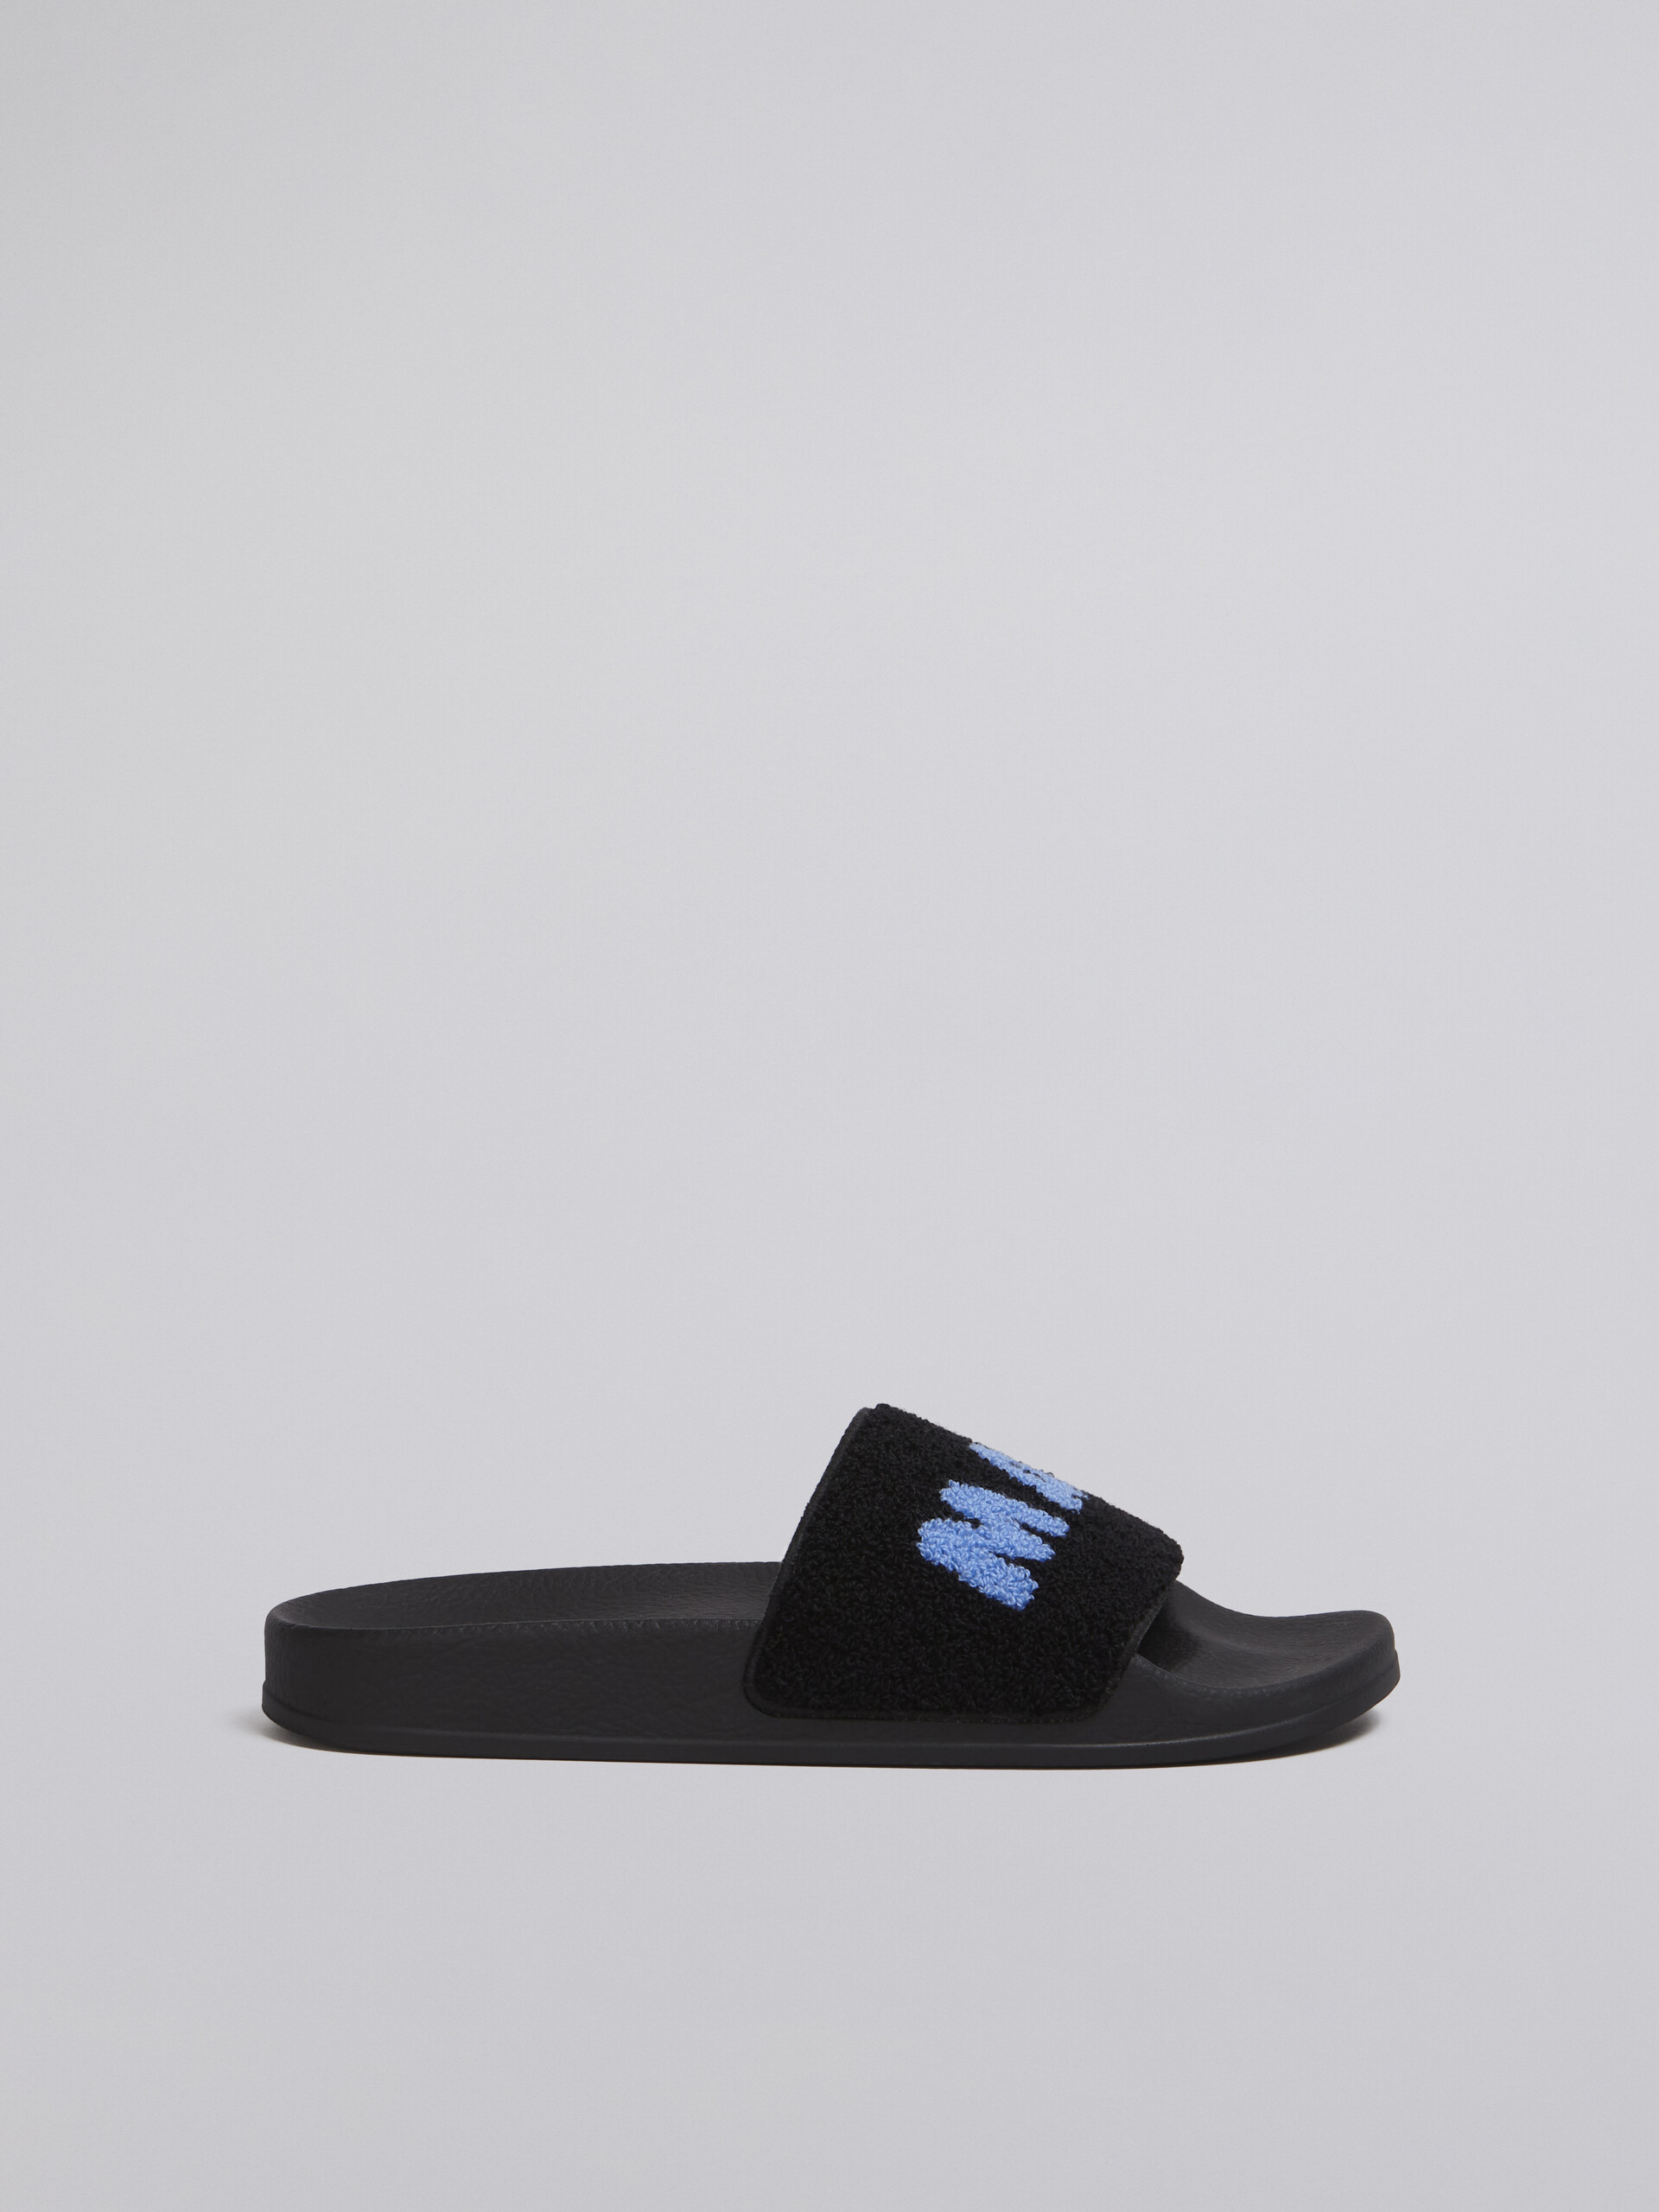 Rubber sandal with black and blue terry-cloth band - Sandals - Image 1